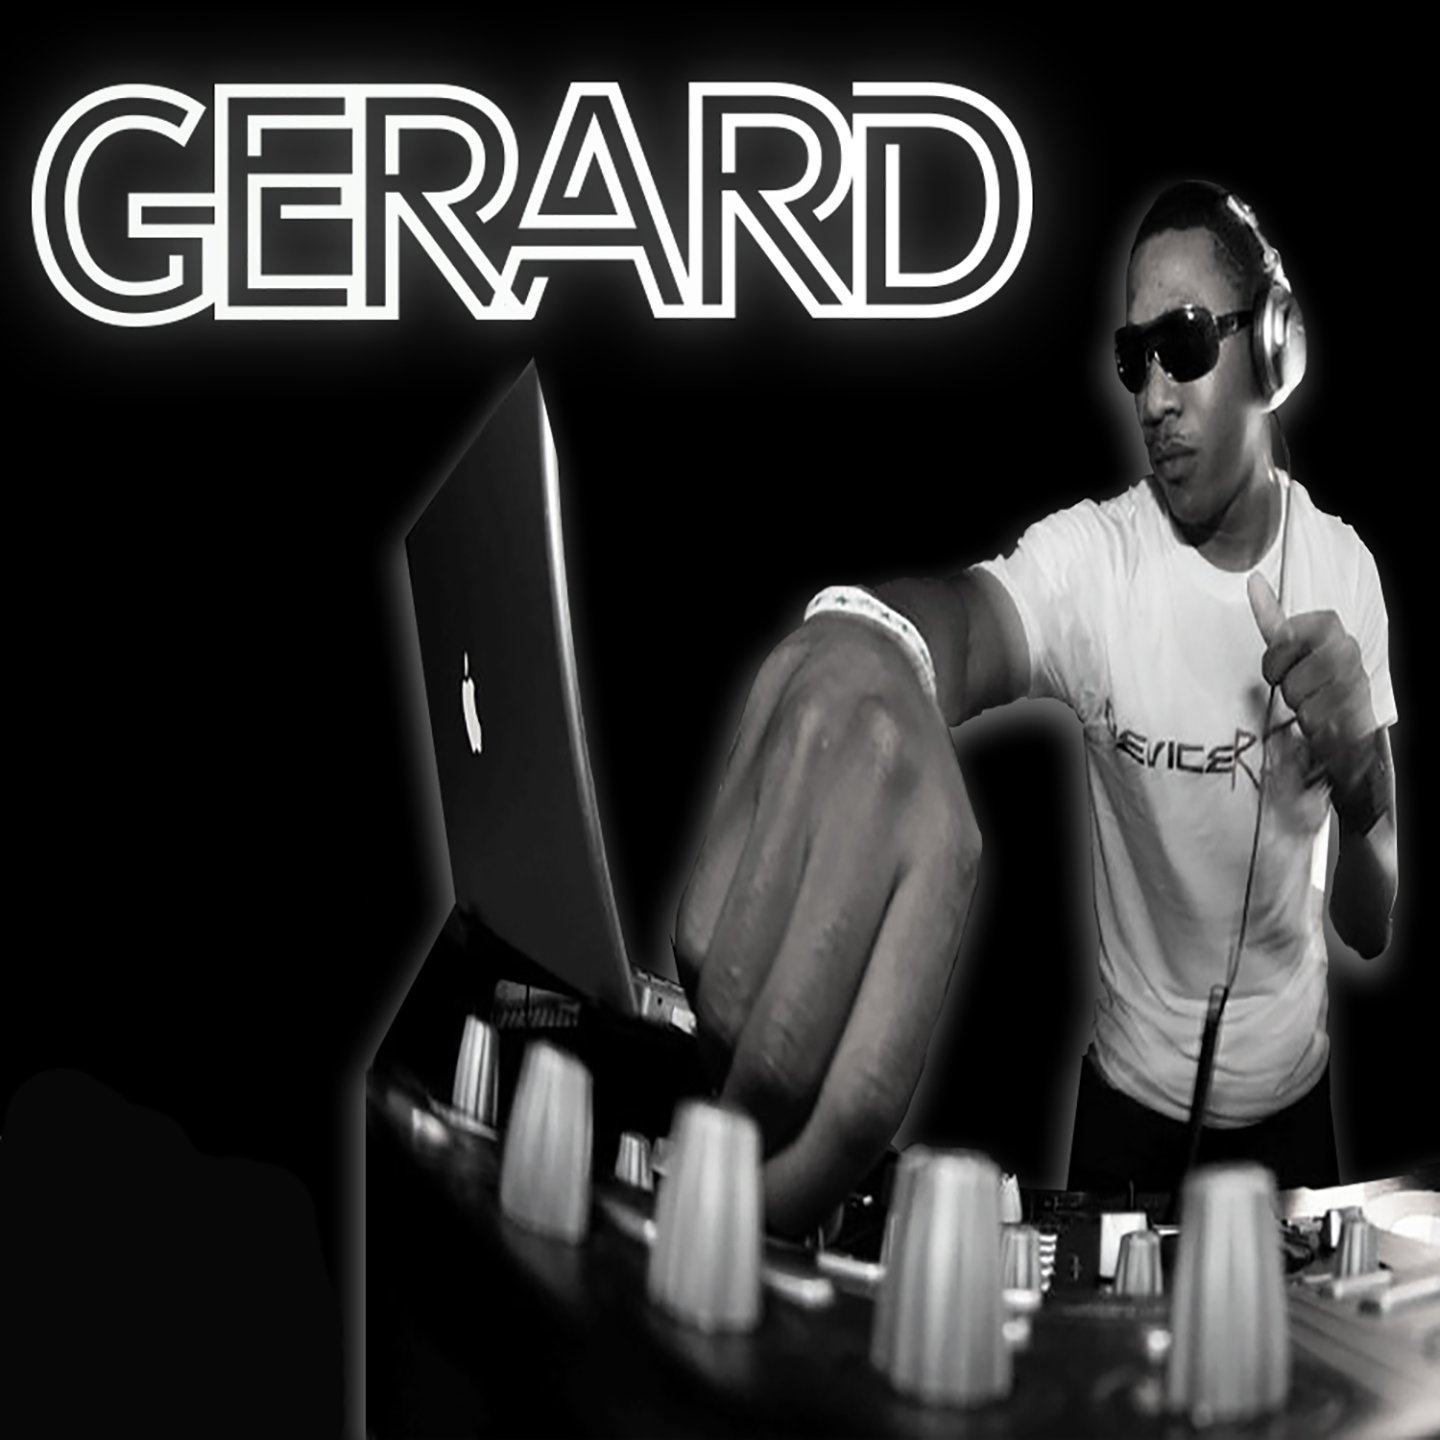 Gerard announces Guest DJ Psycho-UK and playlists for his show 'The Hit List' 14.